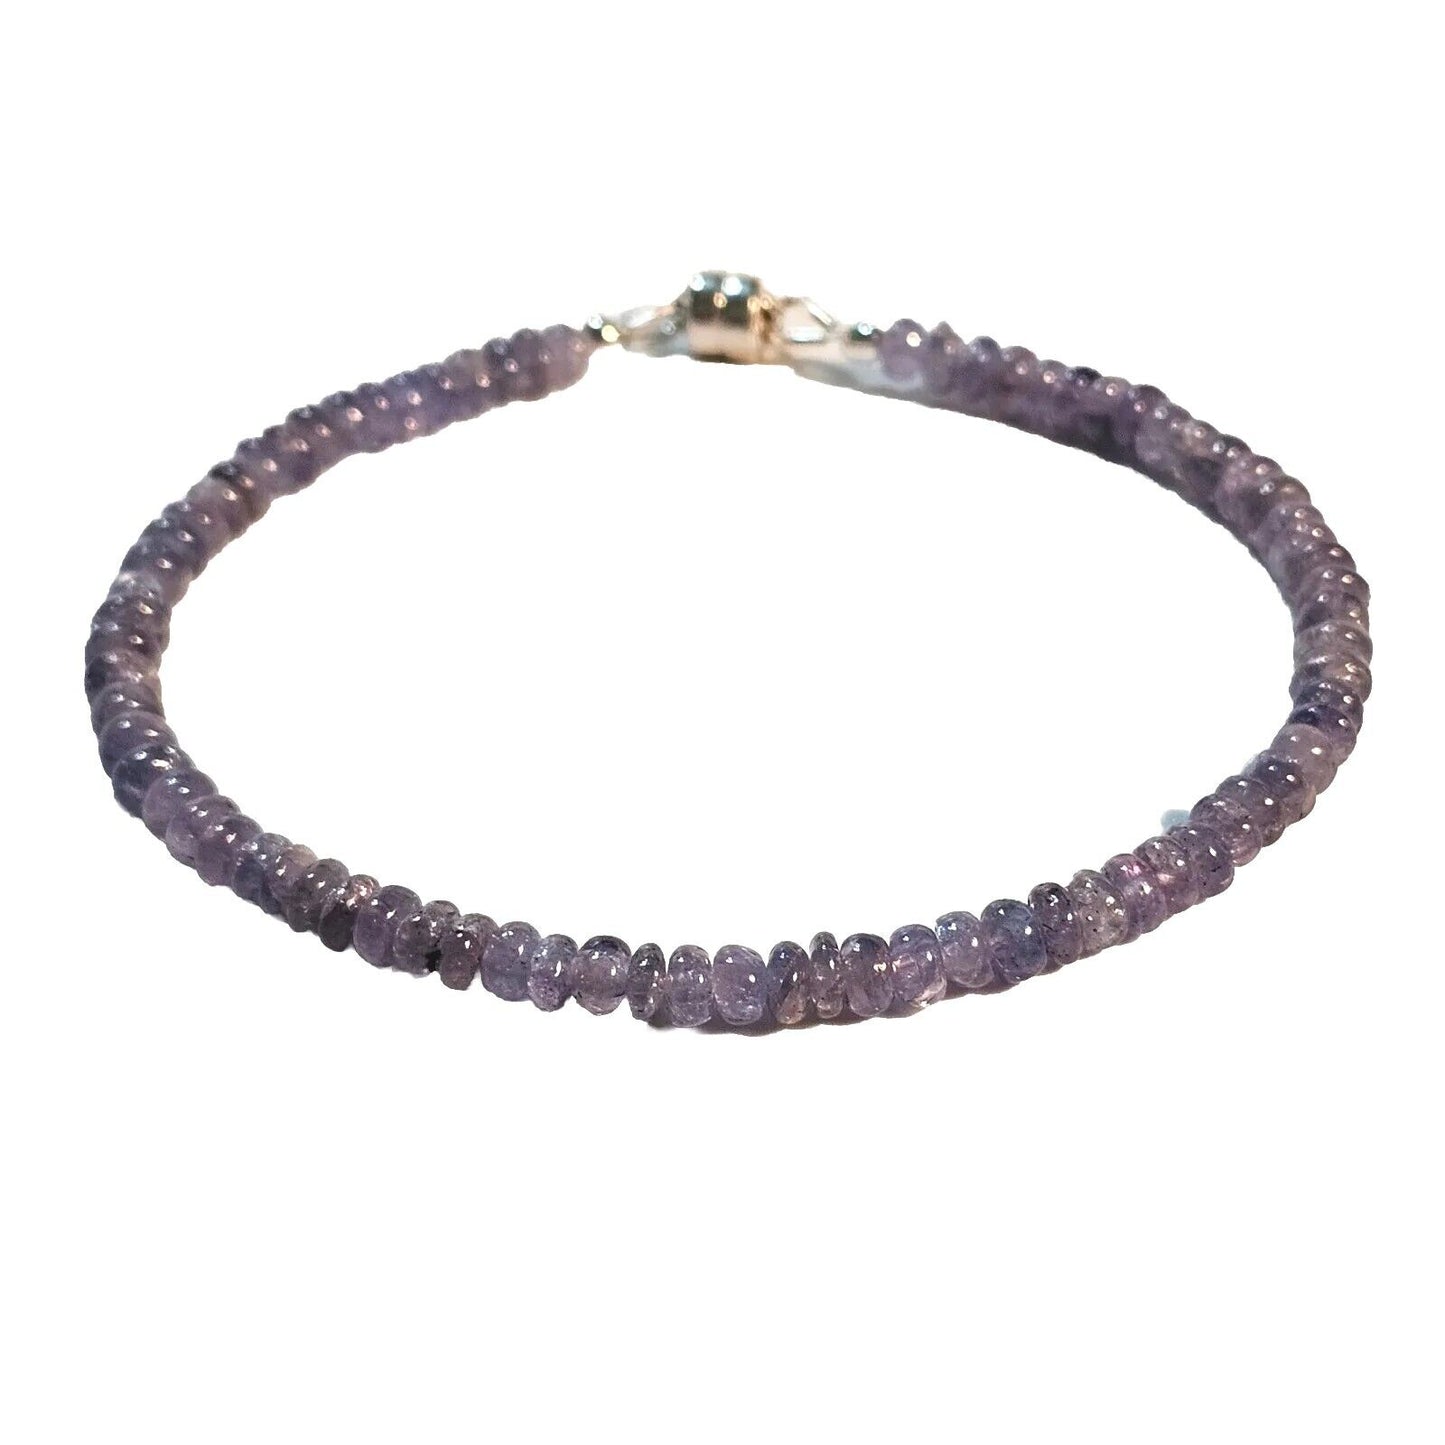 Genuine Tanzanite 925 Sterling Silver Bracelet with Magnetic Clasp 7.5"